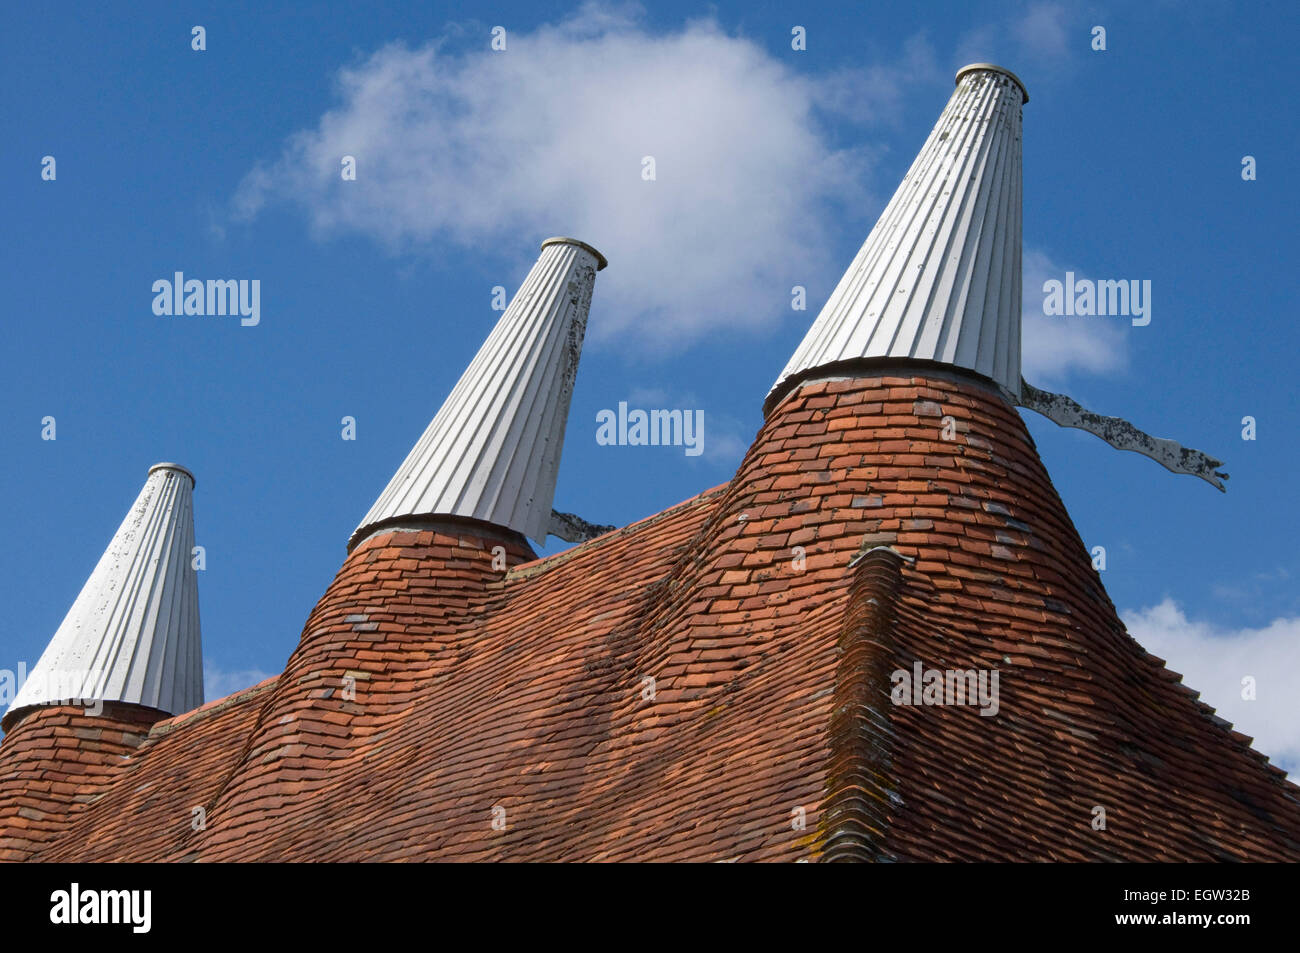 The roof of an old oast house in Kent, England. Stock Photo